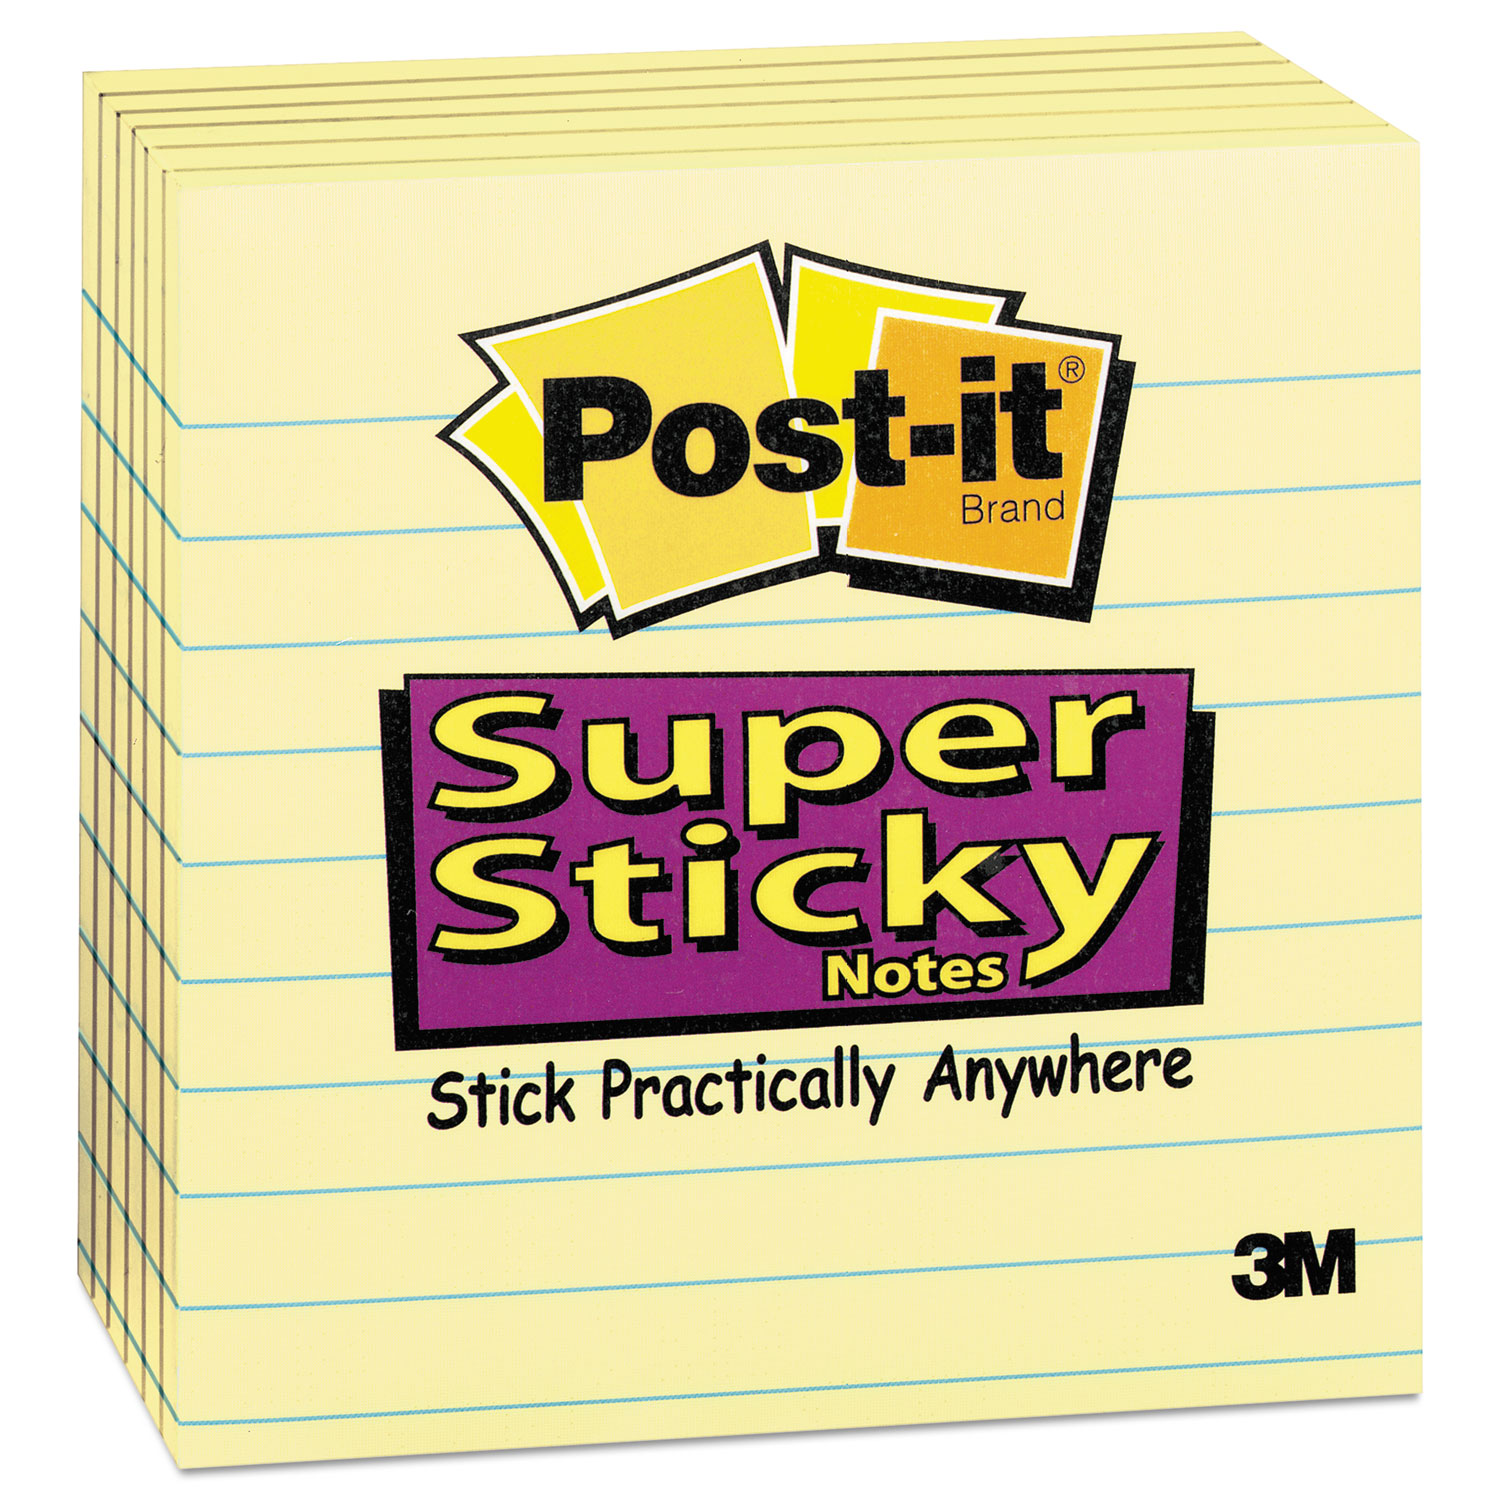 Post-it Pads in Canary Yellow Note Ruled 4 x 4 90 Sheets/Pad 6 Pads/Pack